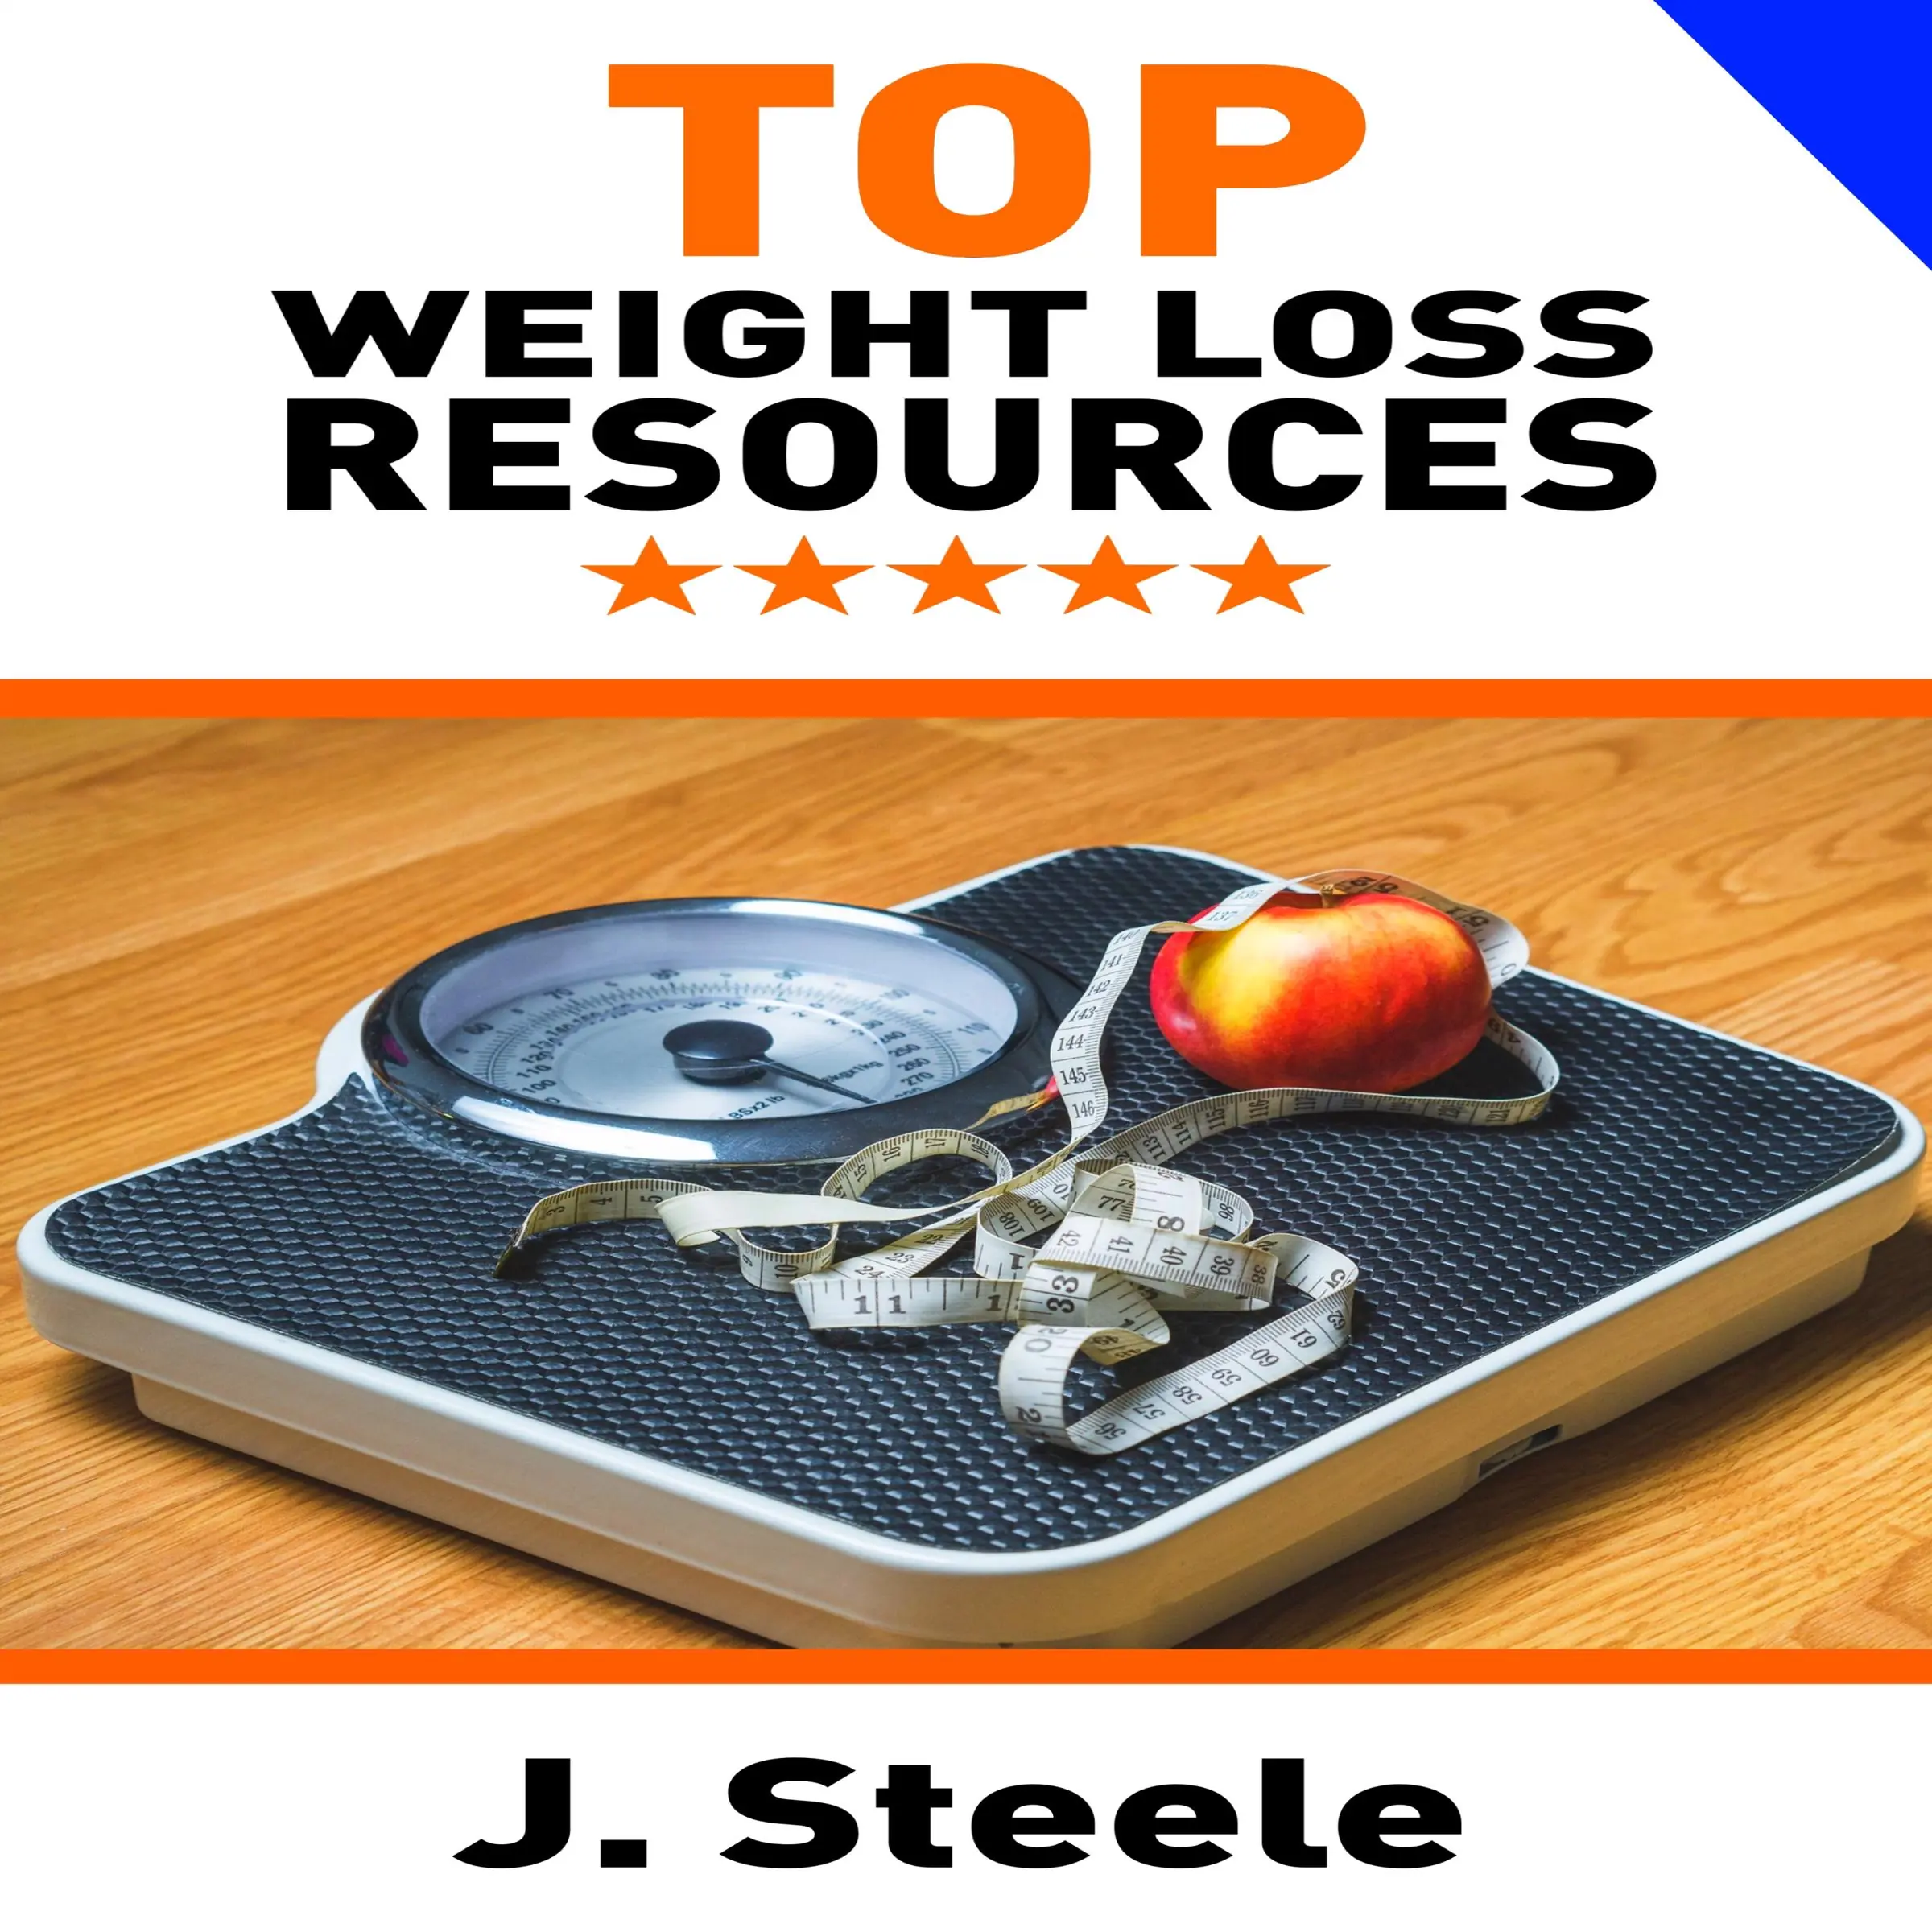 Top Weight Loss Resources Audiobook by J Steele